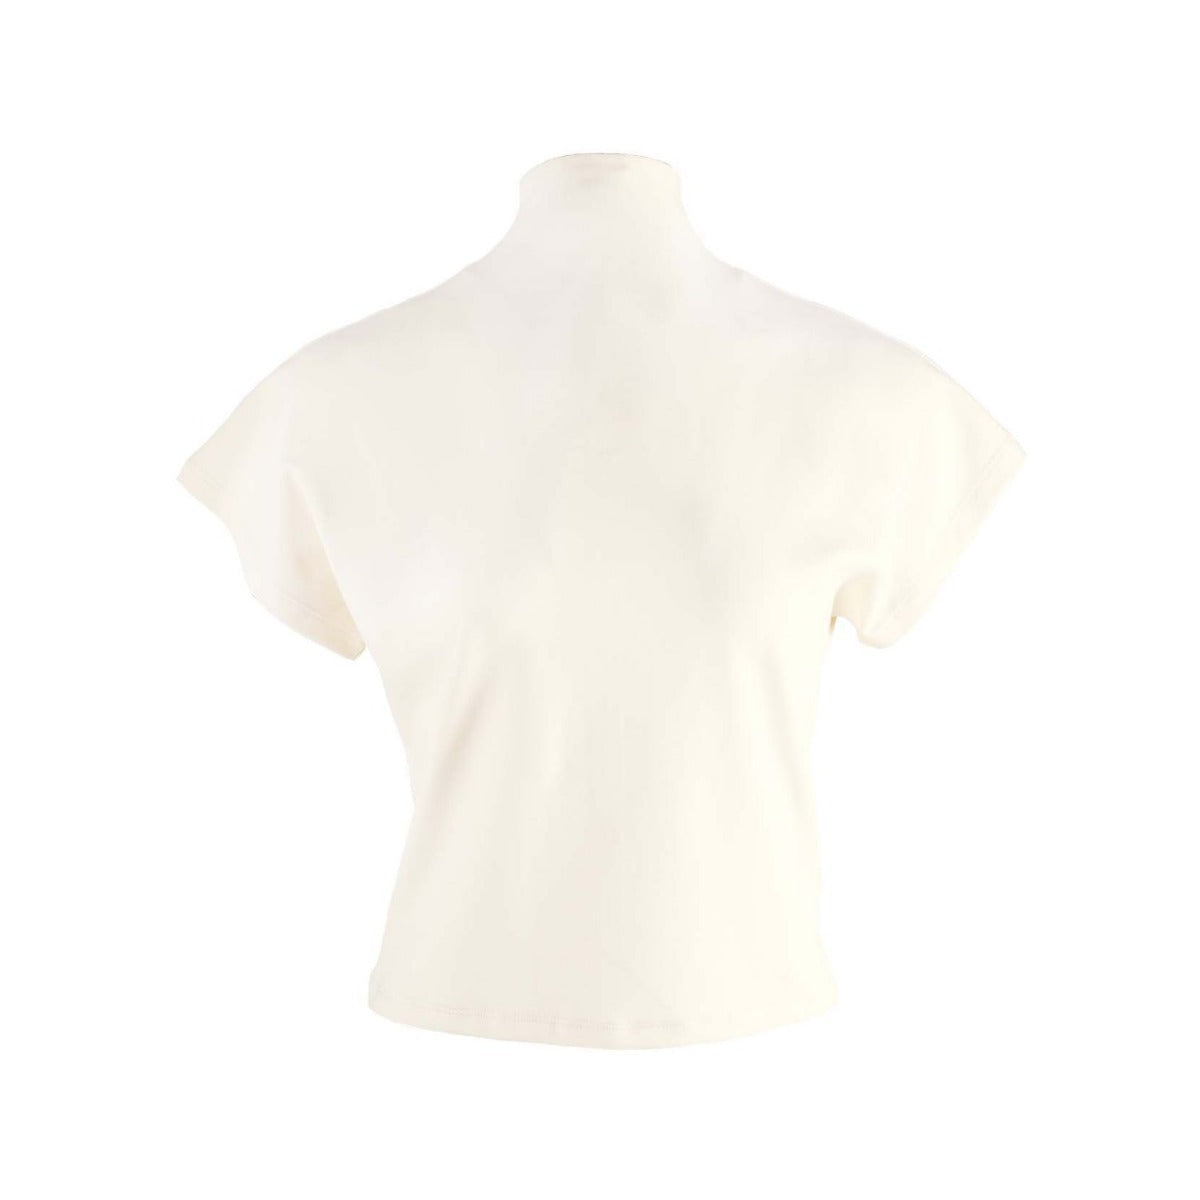 White top Dublin DUB made of organic cotton by 1 People